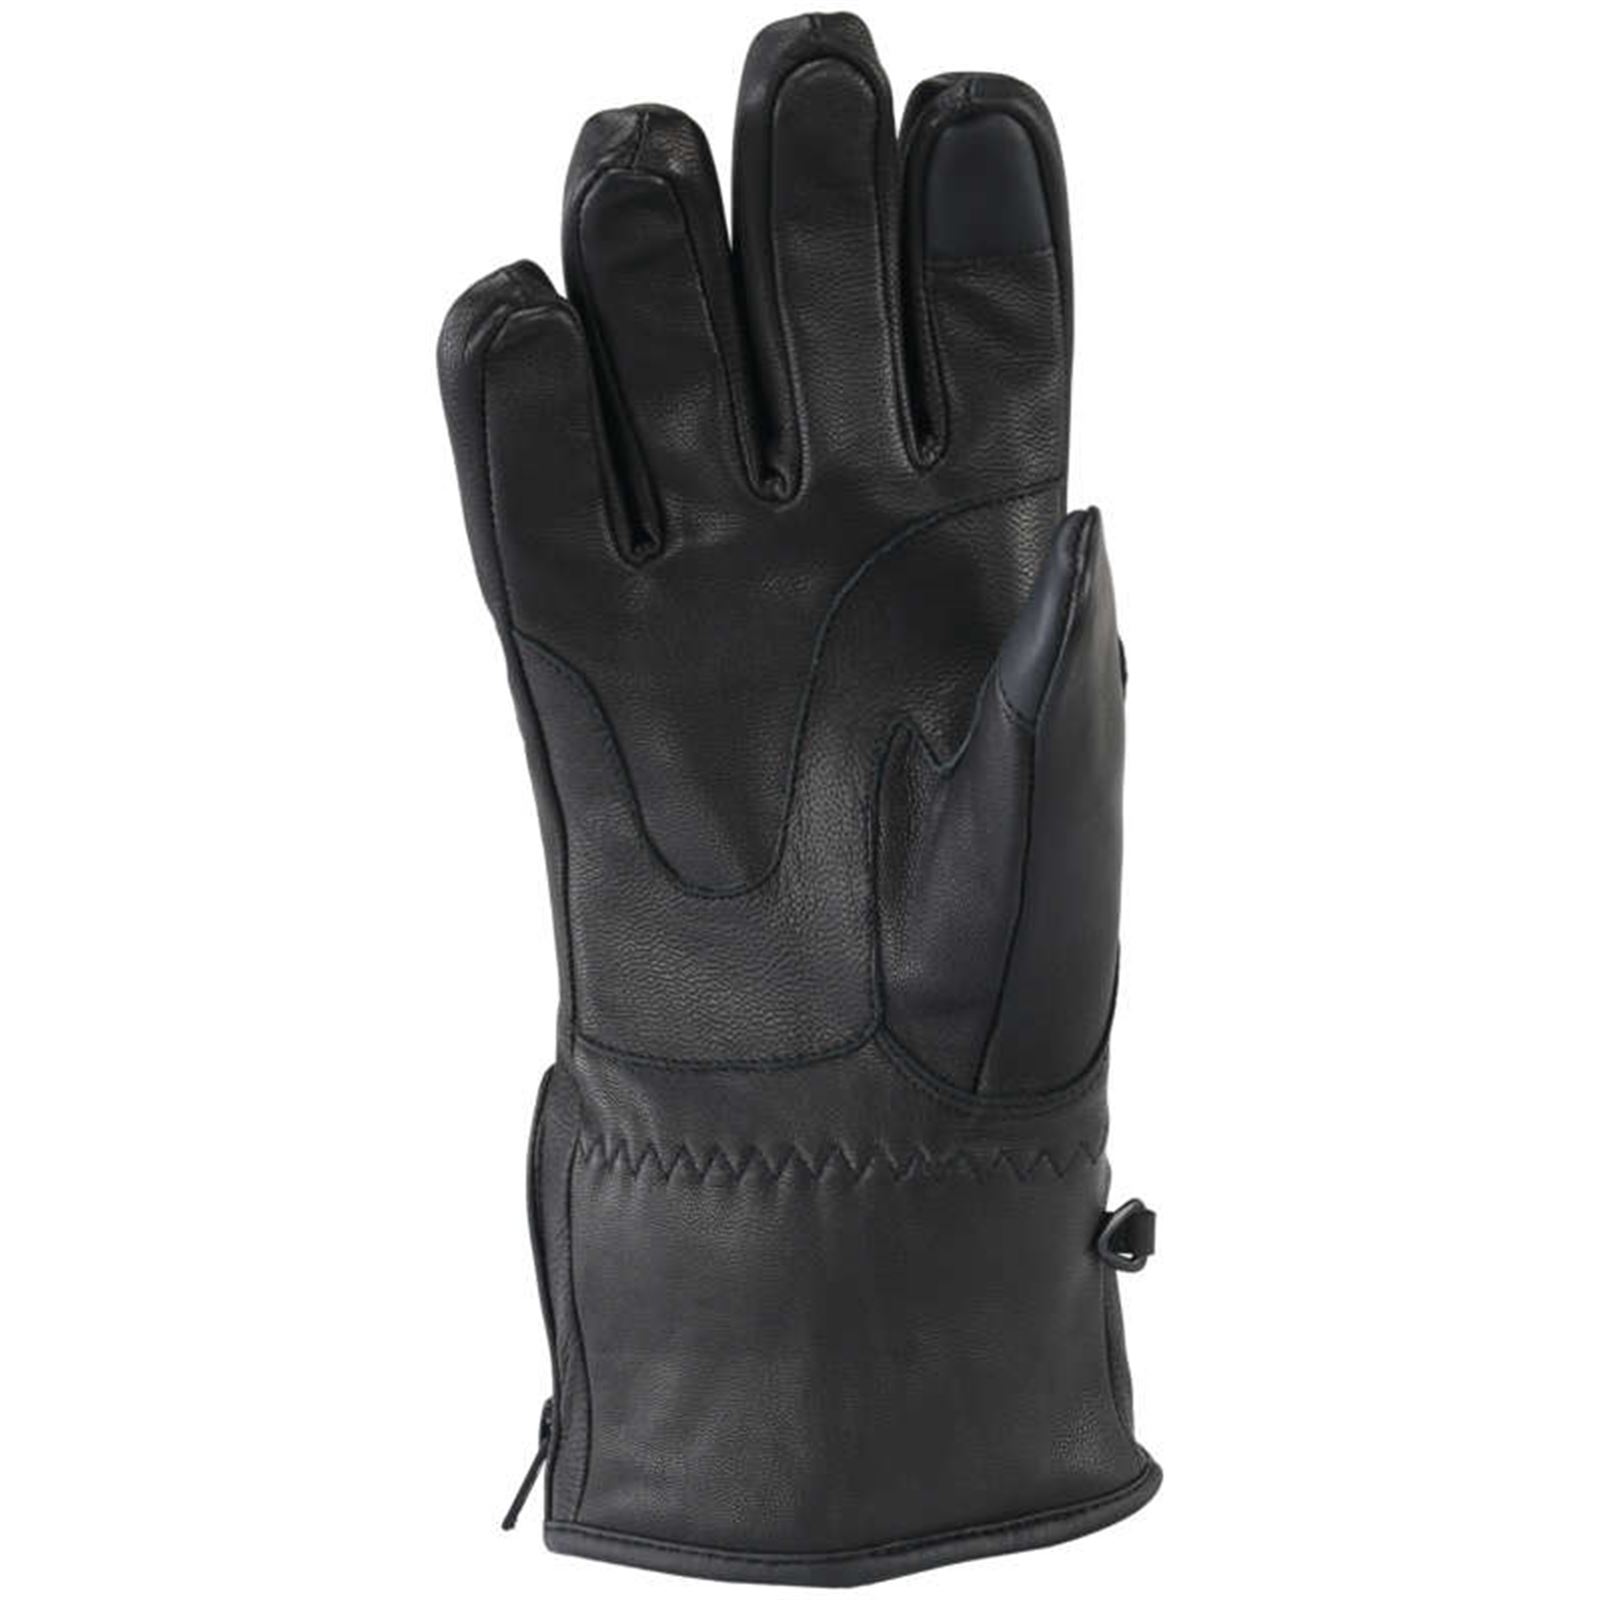 New NWT River Road Chevron Cold Weather Motorcycle Gloves Black Small